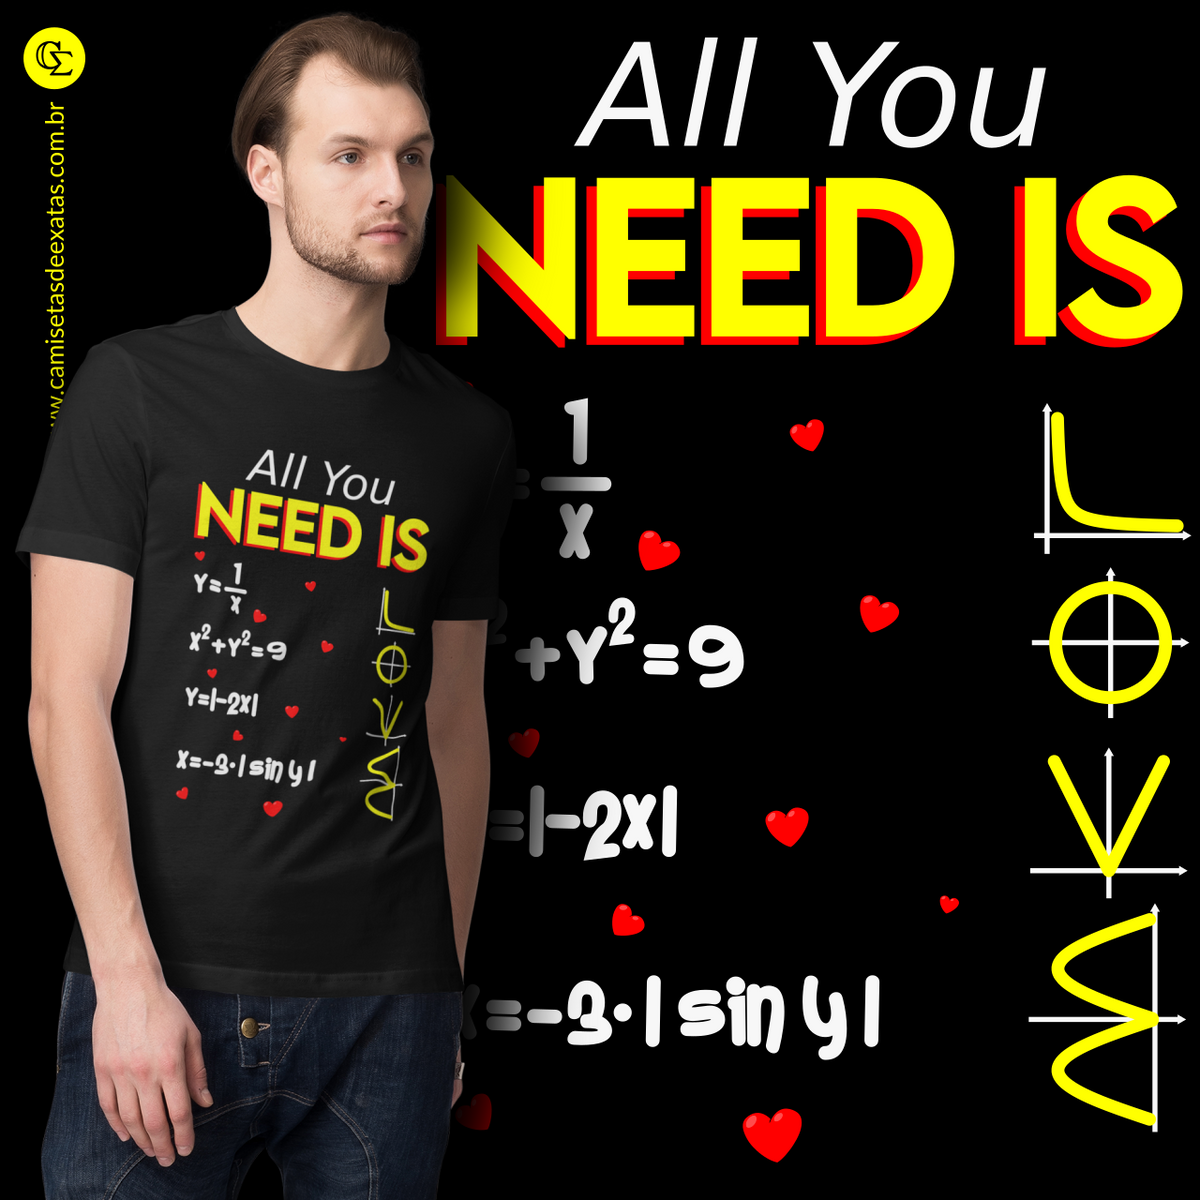 Nome do produto: ALL YOU NEED IS LOVE [4] [UNISSEX]